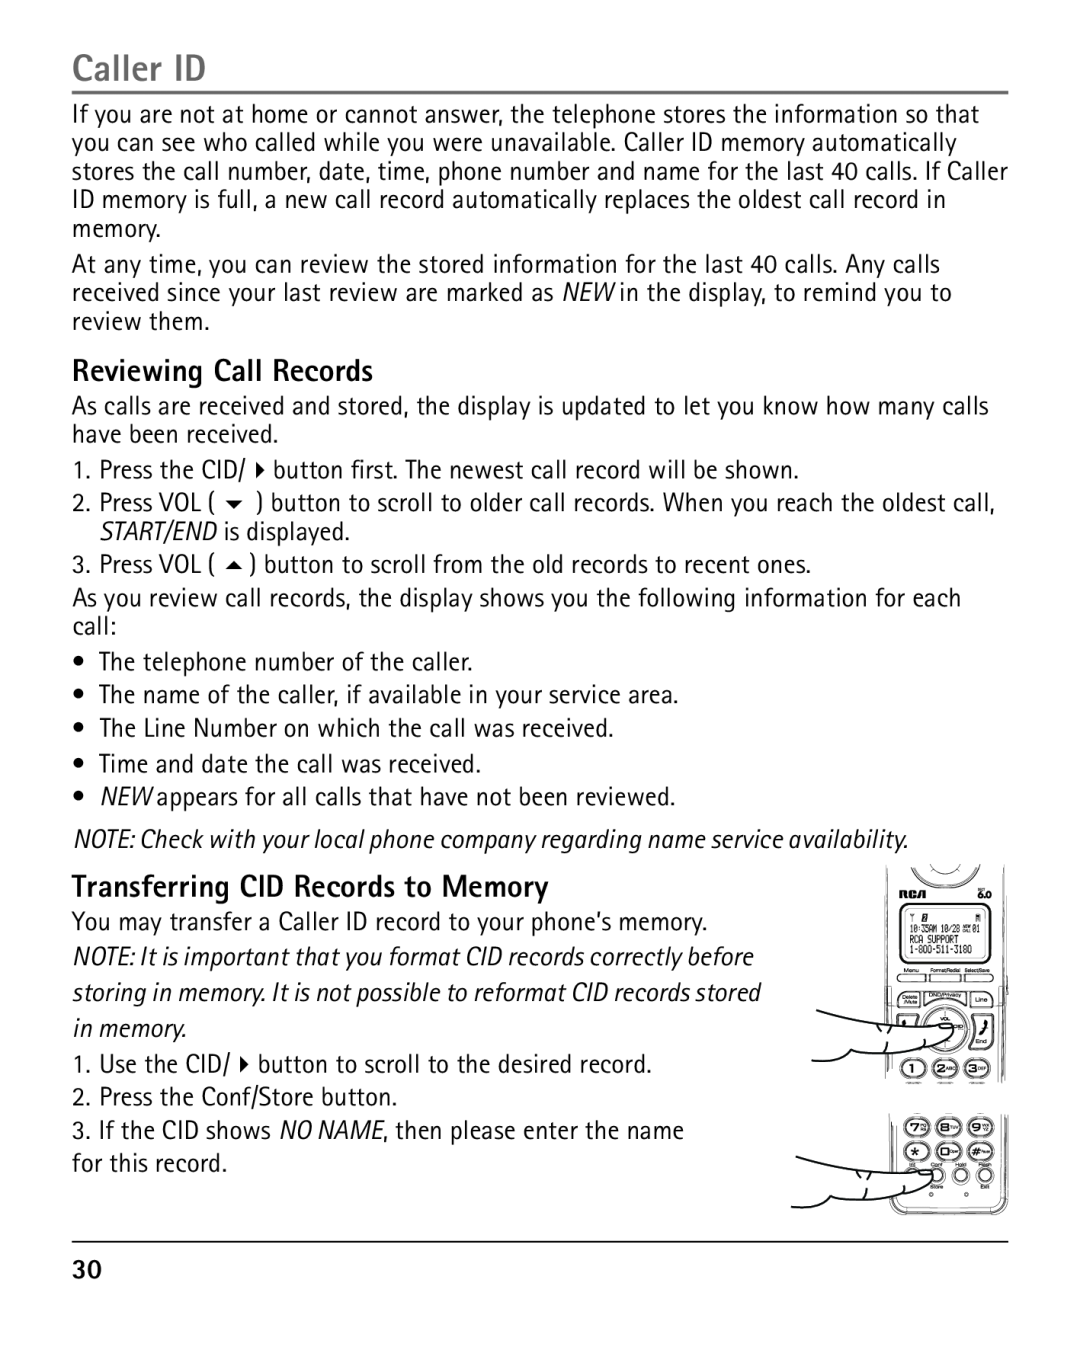 RCA 25420 manual Caller ID, Reviewing Call Records, Transferring CID Records to Memory 